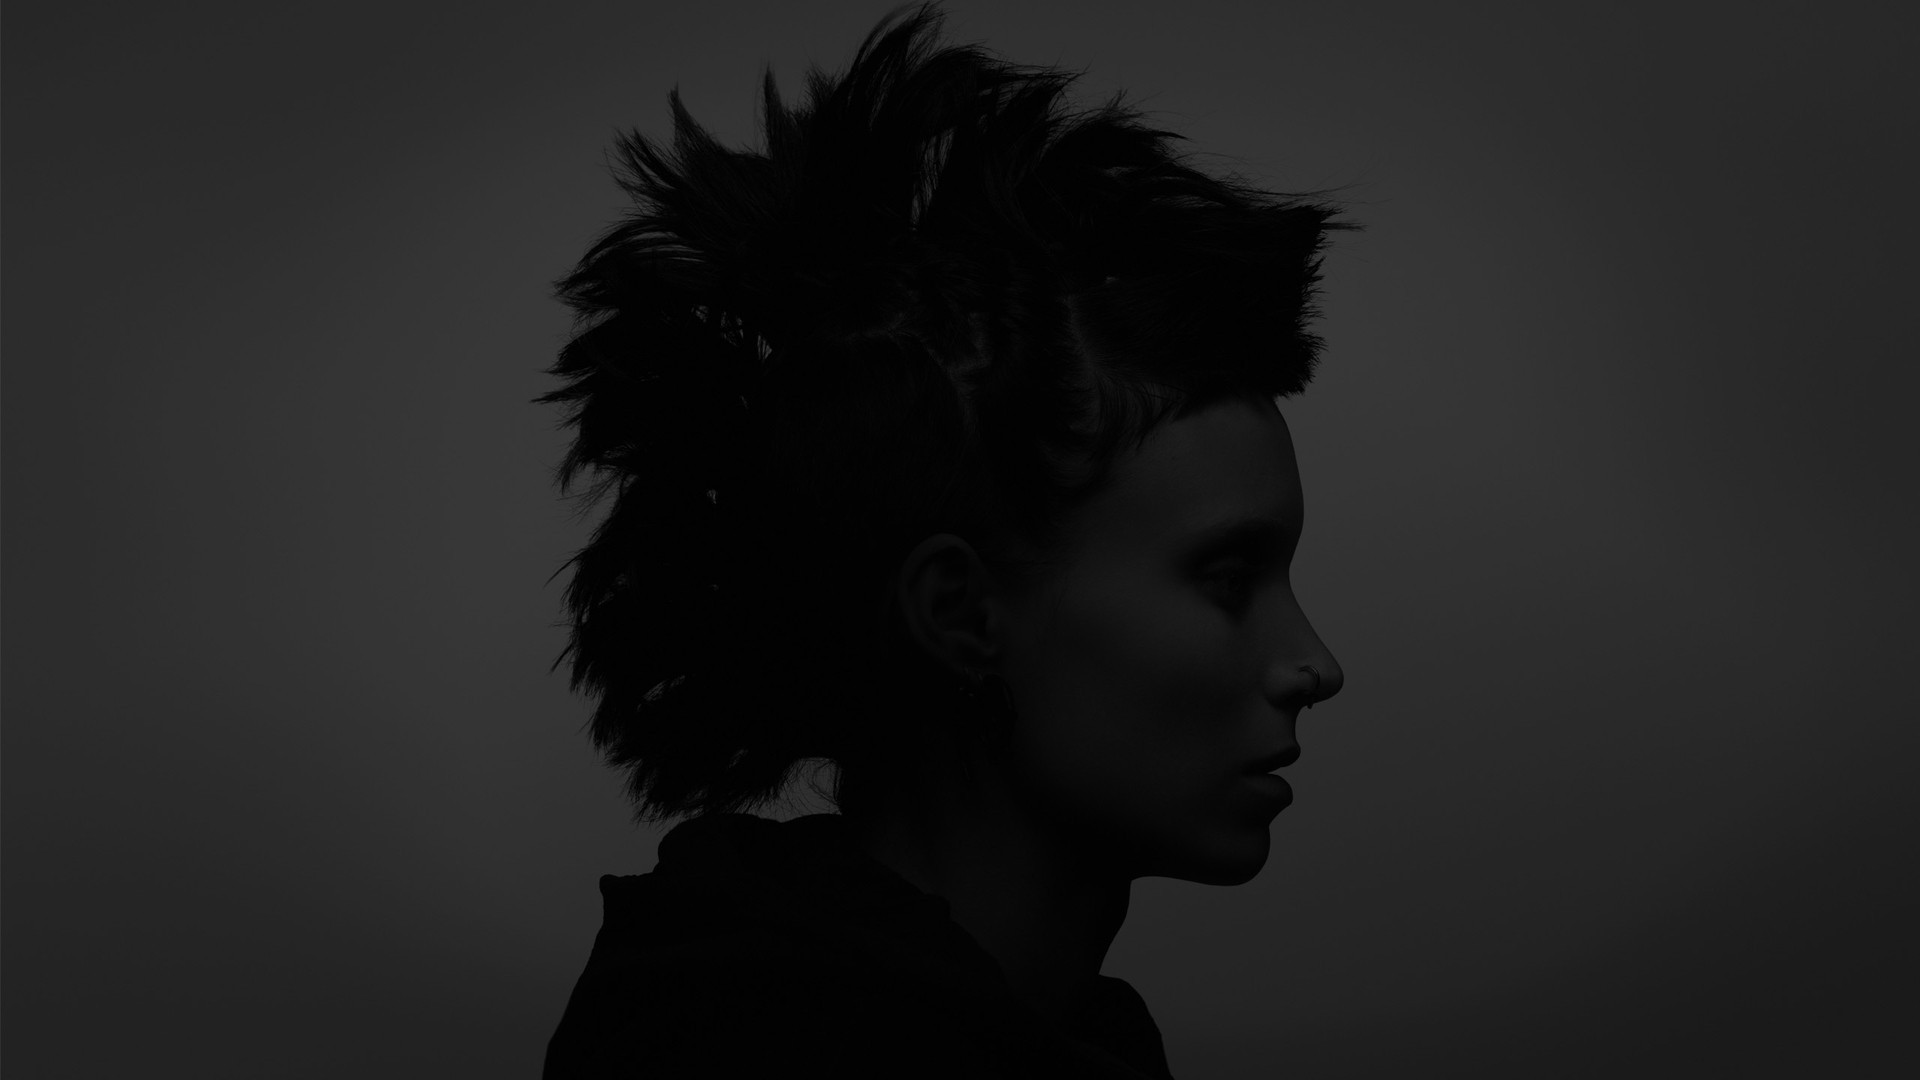 The Girl With The Dragon Tattoo, Monochrome, Rooney Mara Wallpaper